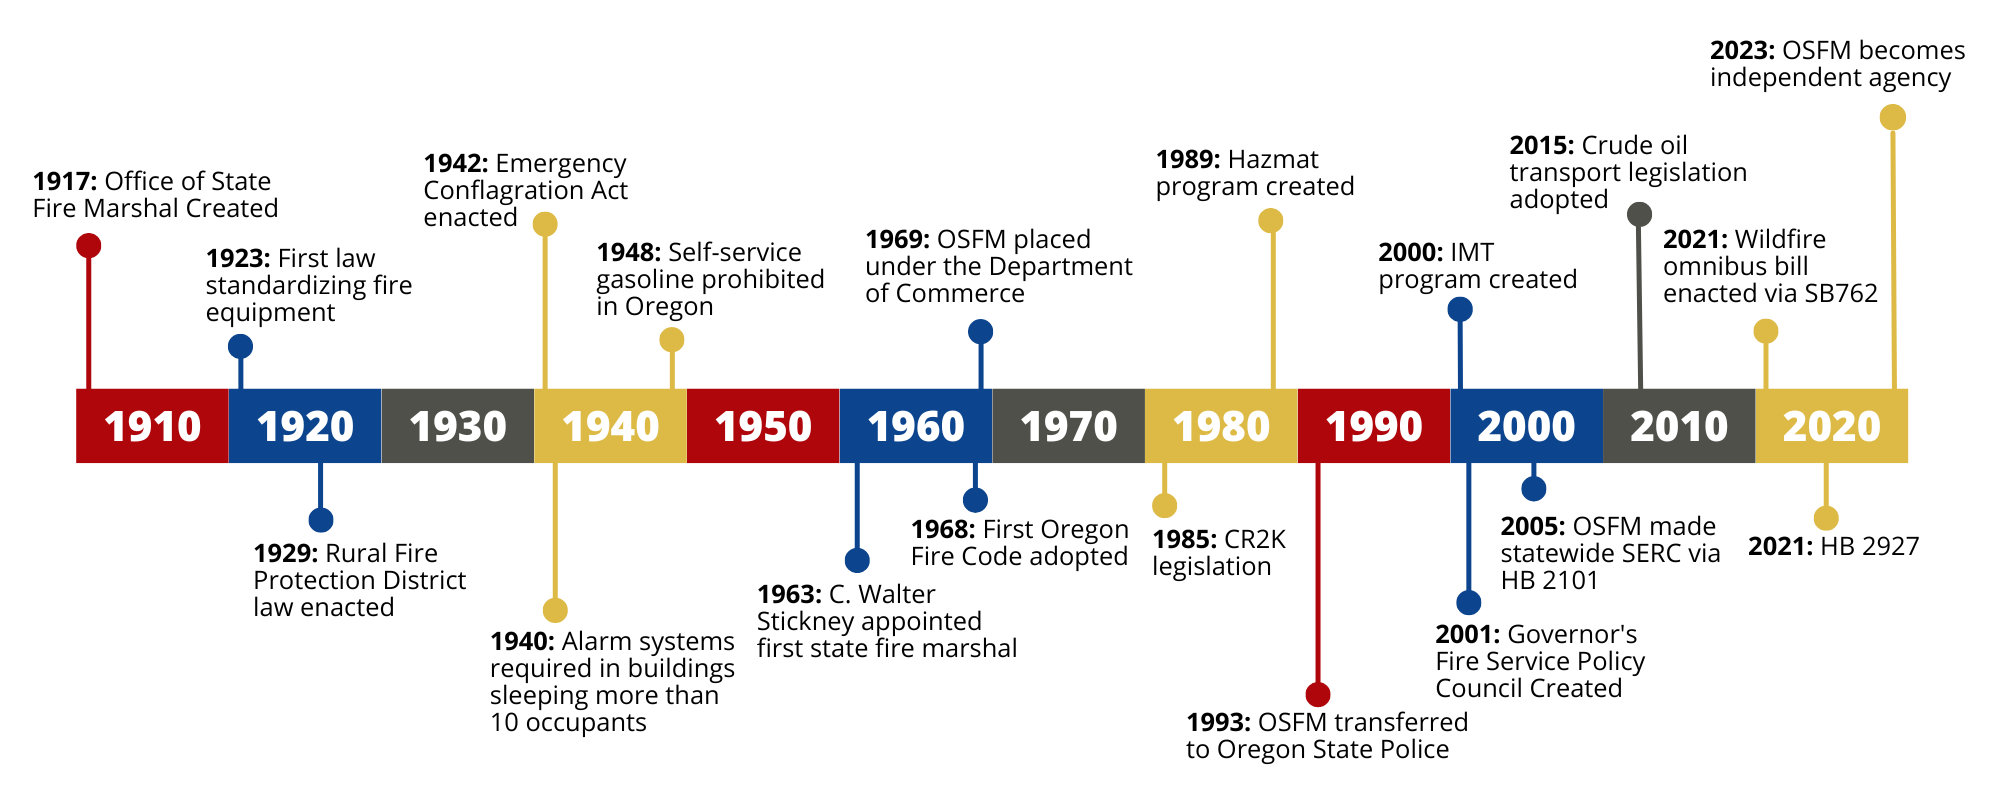 timeline of the osfm history